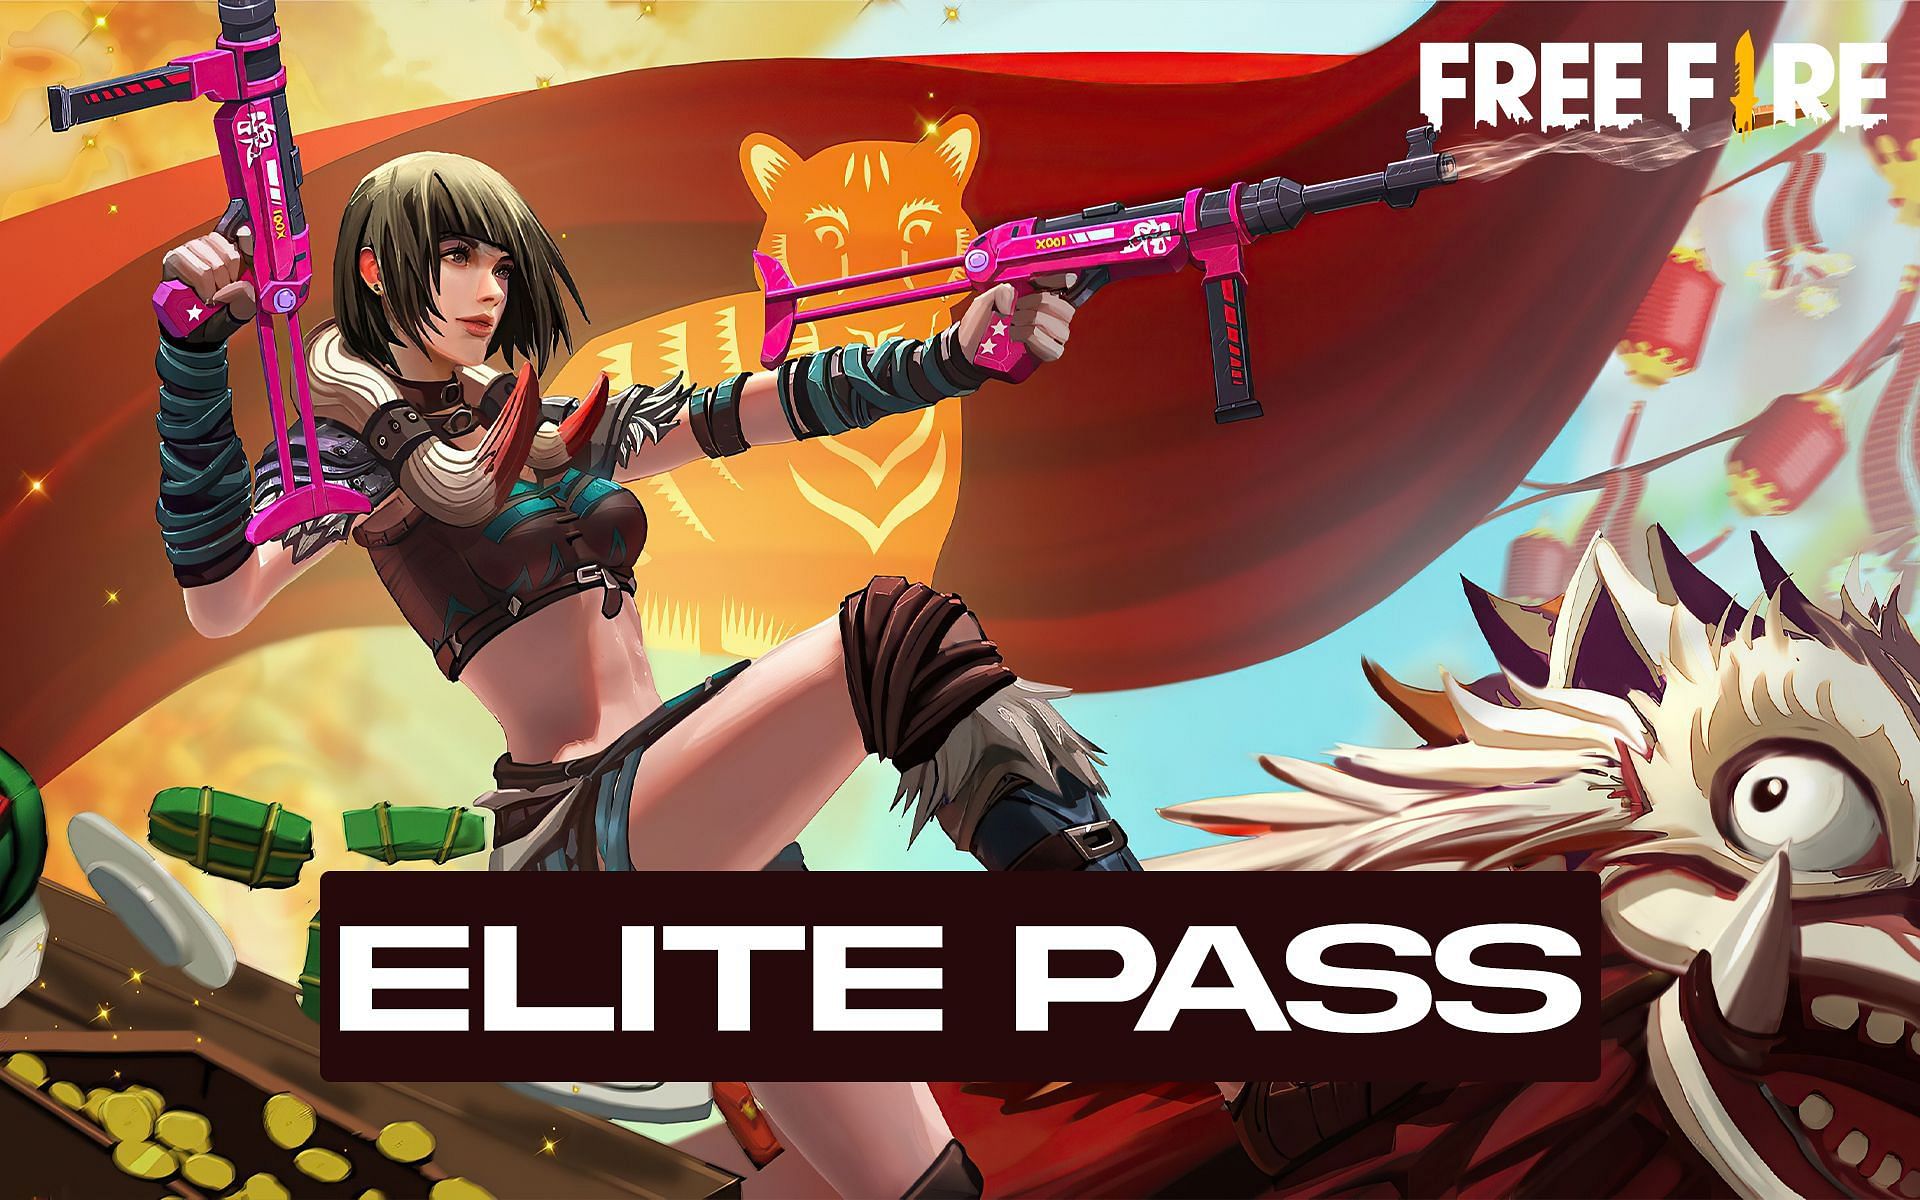 Next Elite Pass of Free Fire will be starting in March (Image via Garena)